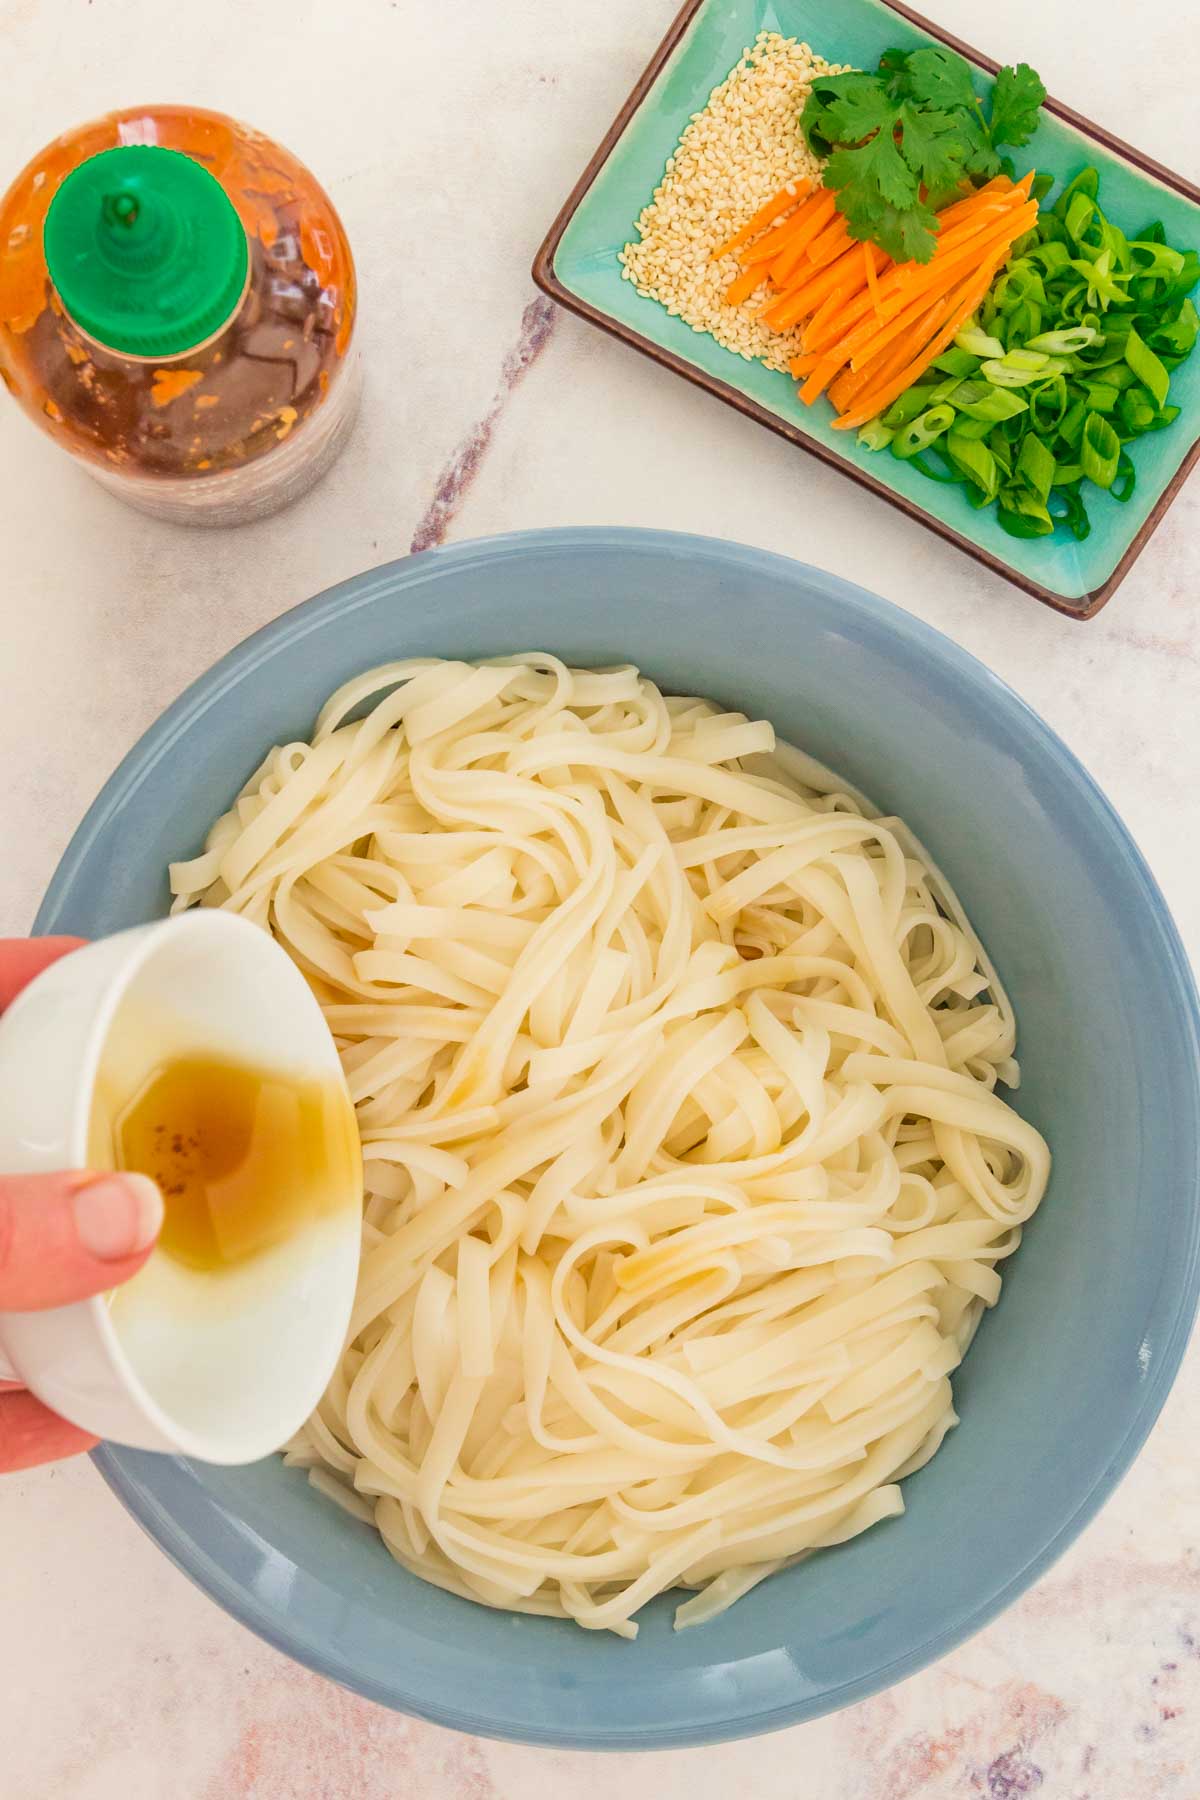 Sesame oil being added to a bowl of cooked pasta.